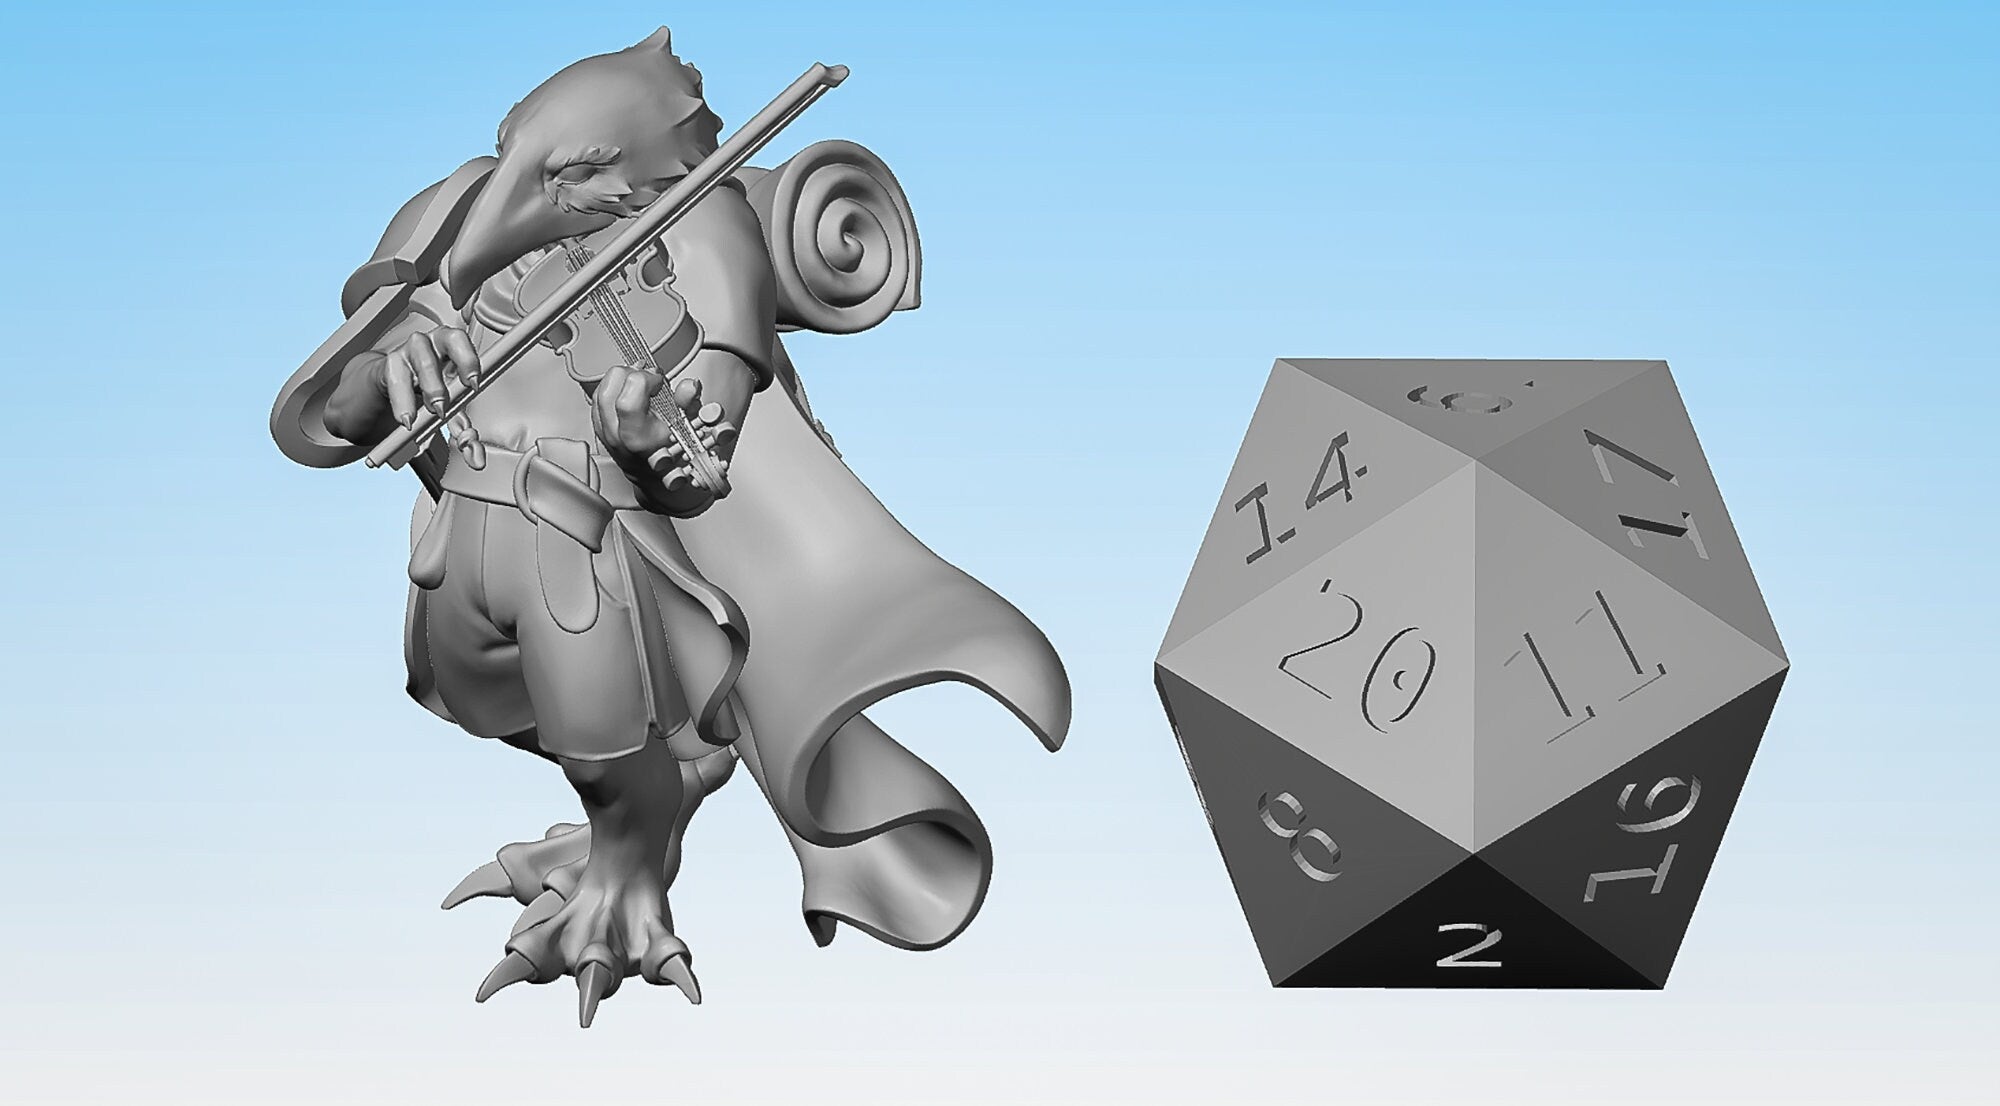 KENKU BARD | Dungeons and Dragons | DnD | Pathfinder | Tabletop | RPG | Hero Size | 28 mm-Role Playing Miniatures